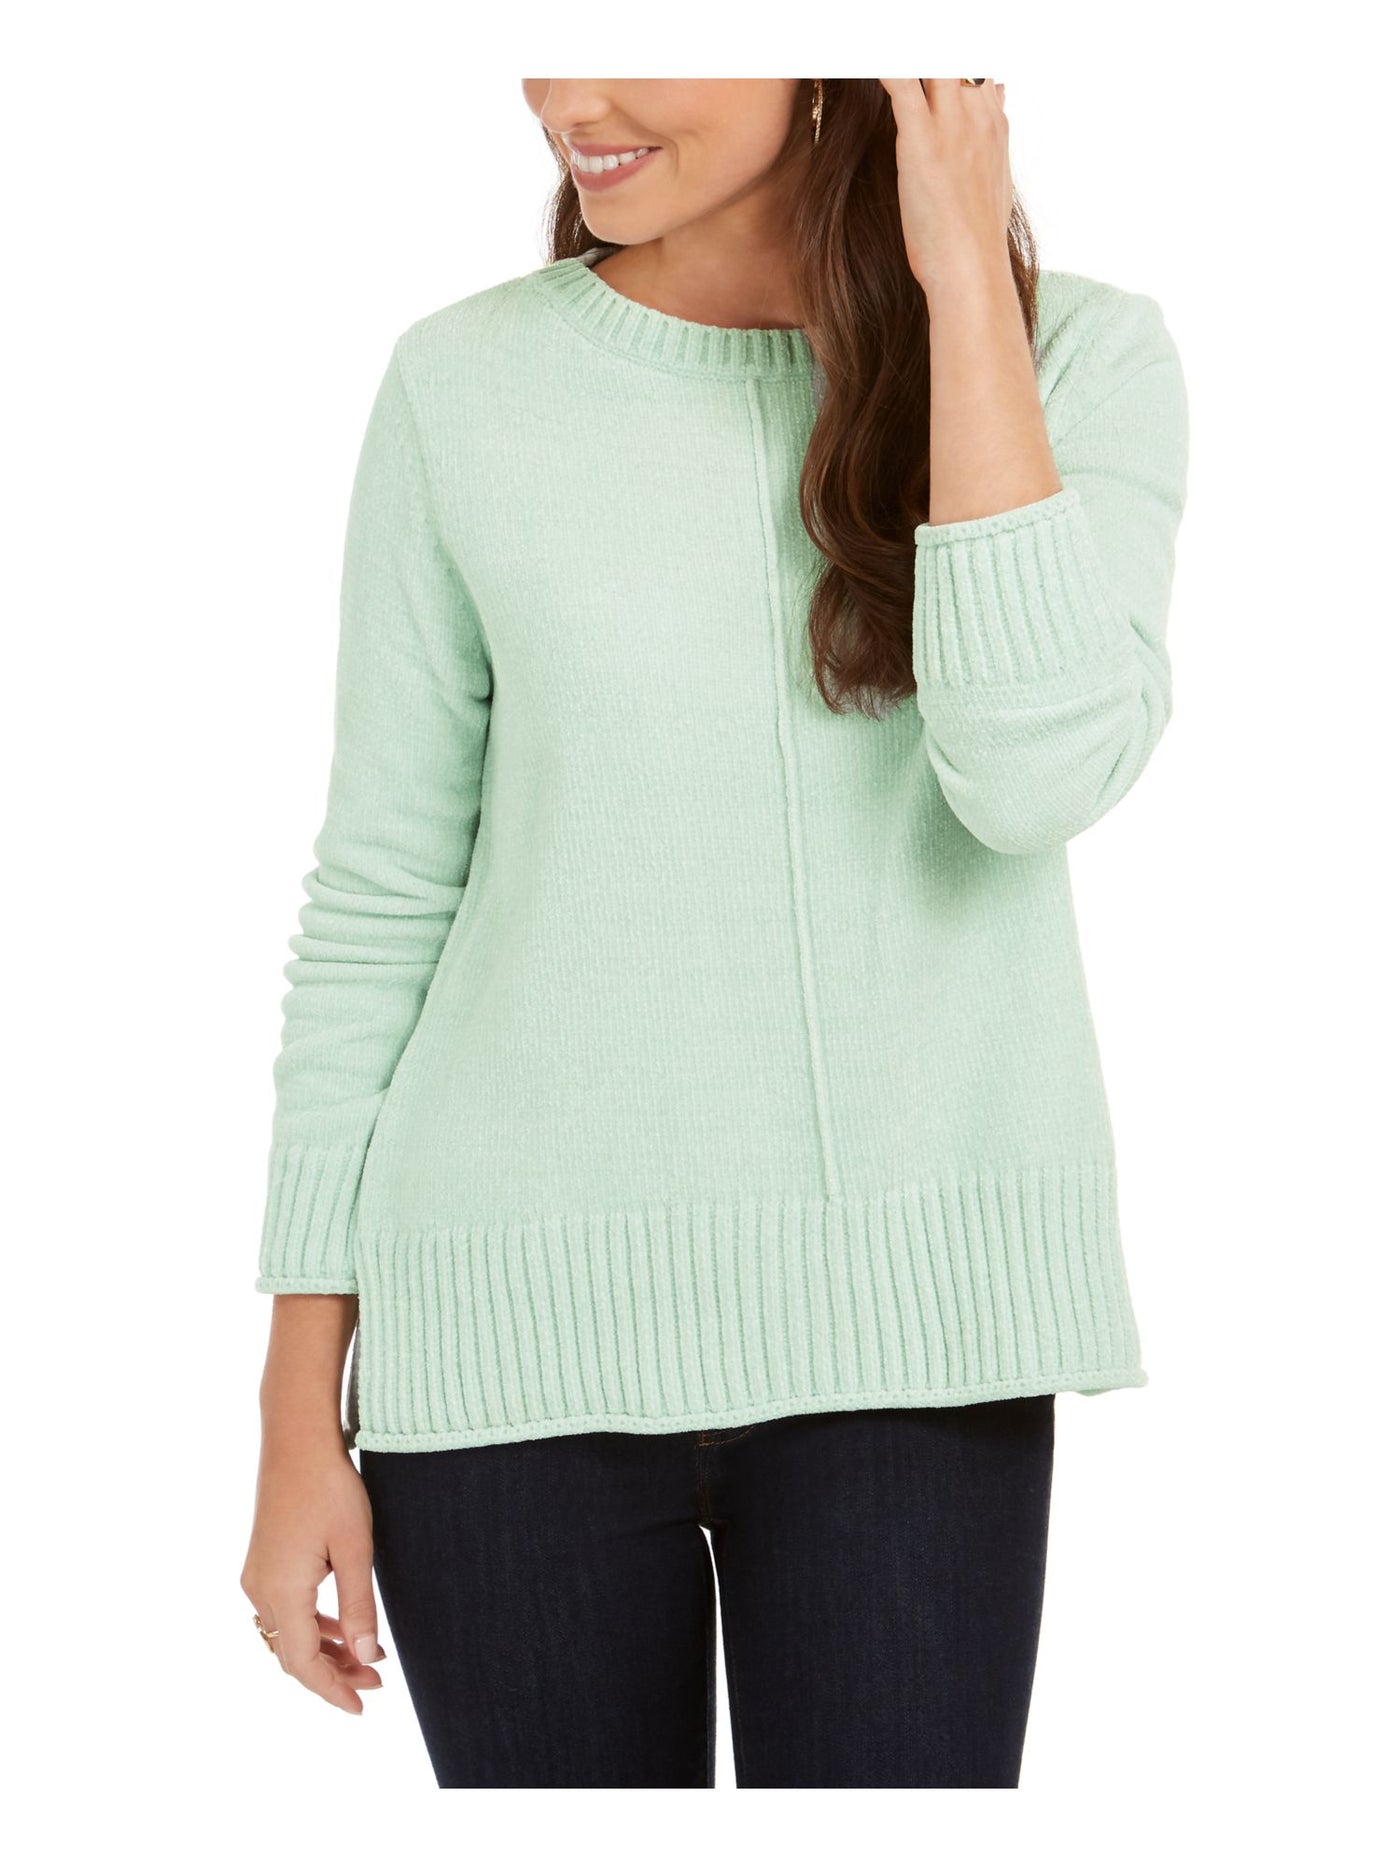 STYLE & COMPANY Womens Green Heather Long Sleeve Sweater Size: S